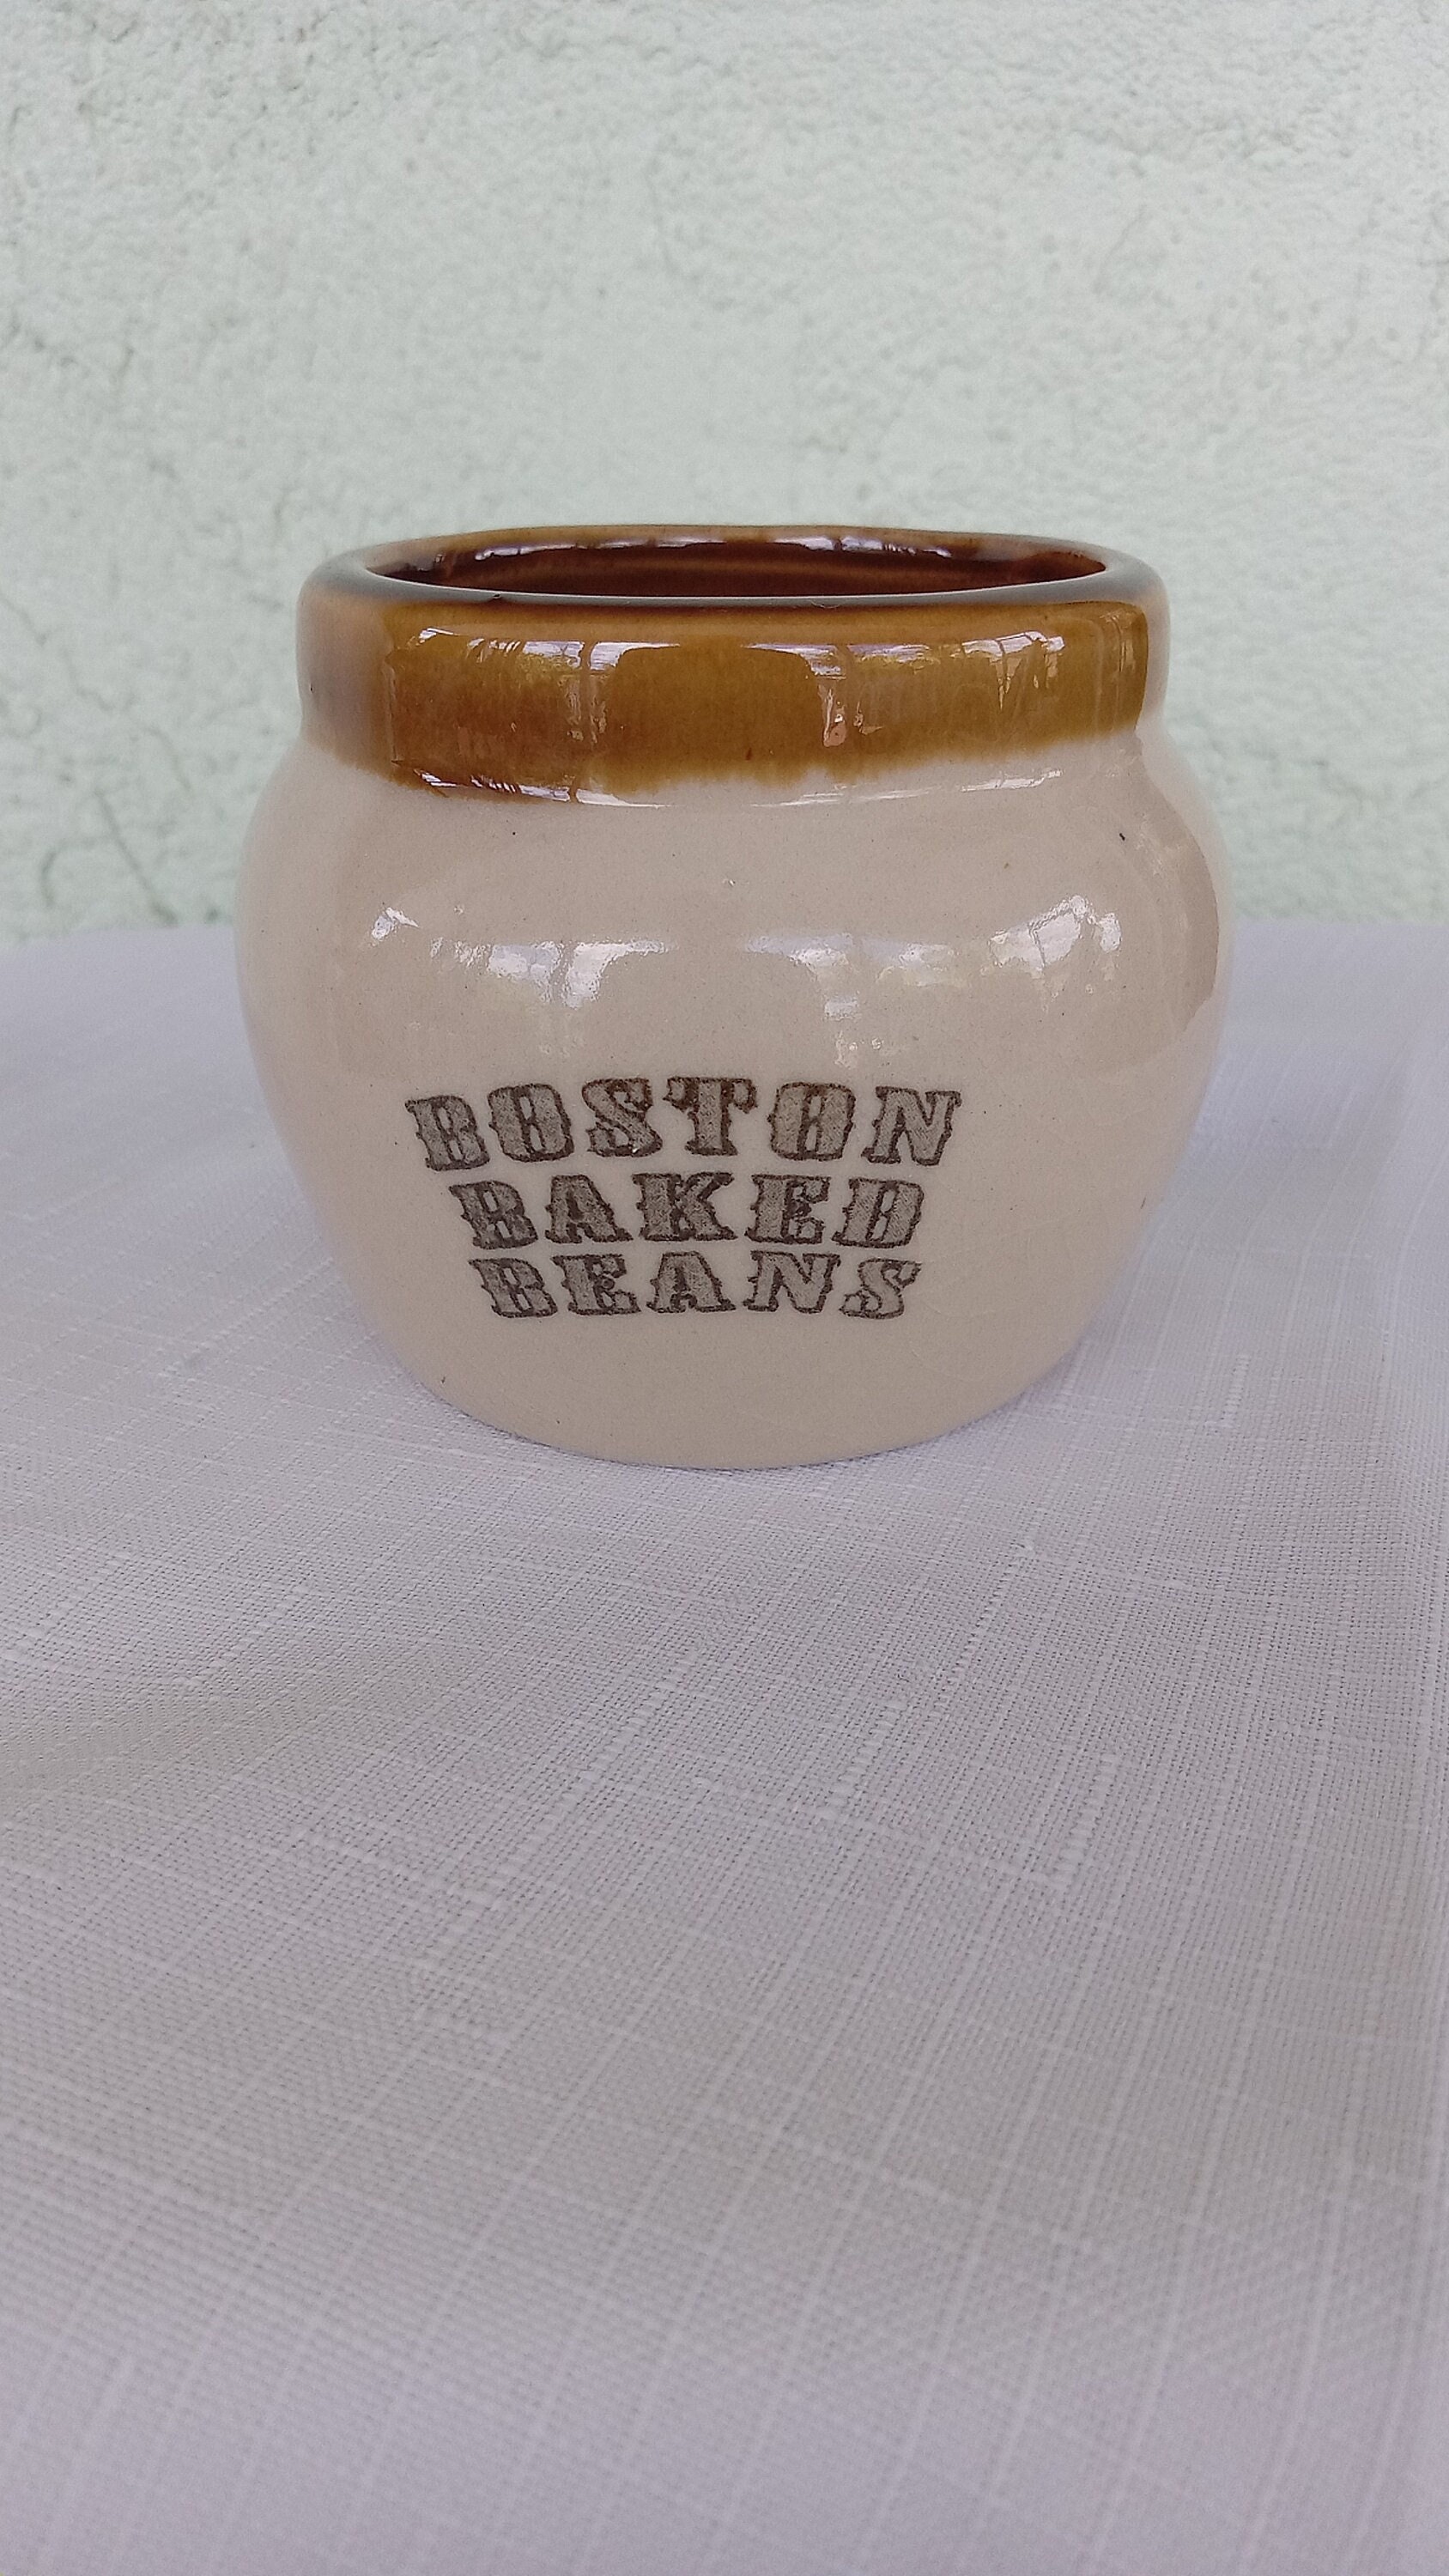 Antique American Stoneware Boston Baked Beans Cooking Pot From Portland  Maine